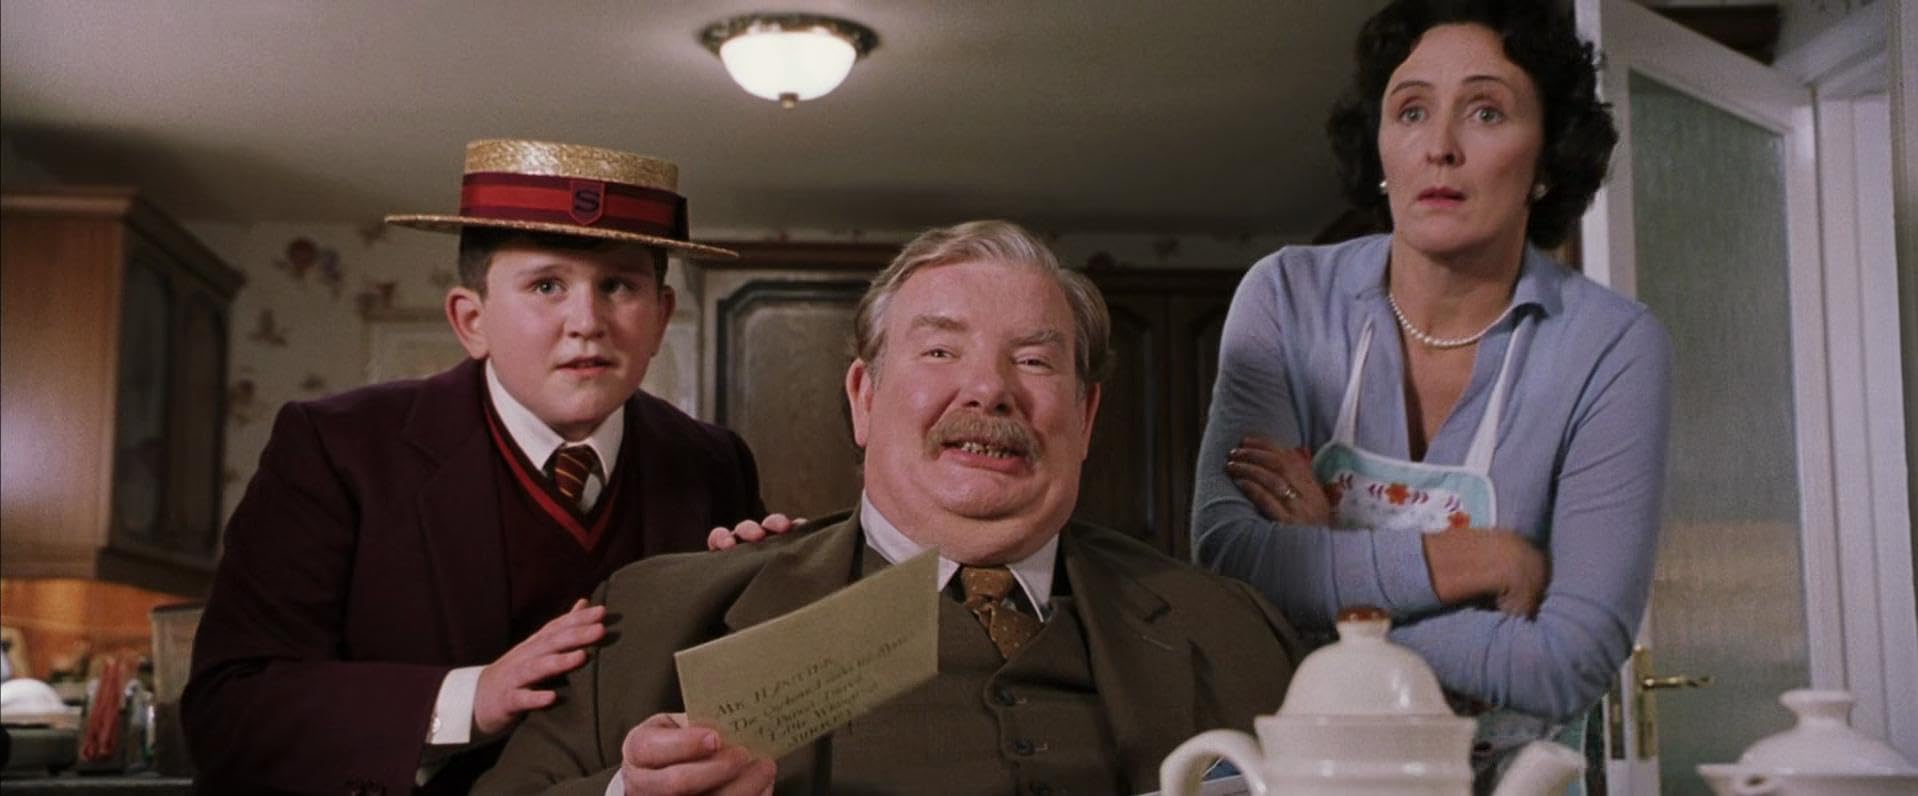 Richard Griffiths, Harry Melling, and Fiona Shaw in Harry Potter e la pietra filosofale (2001)